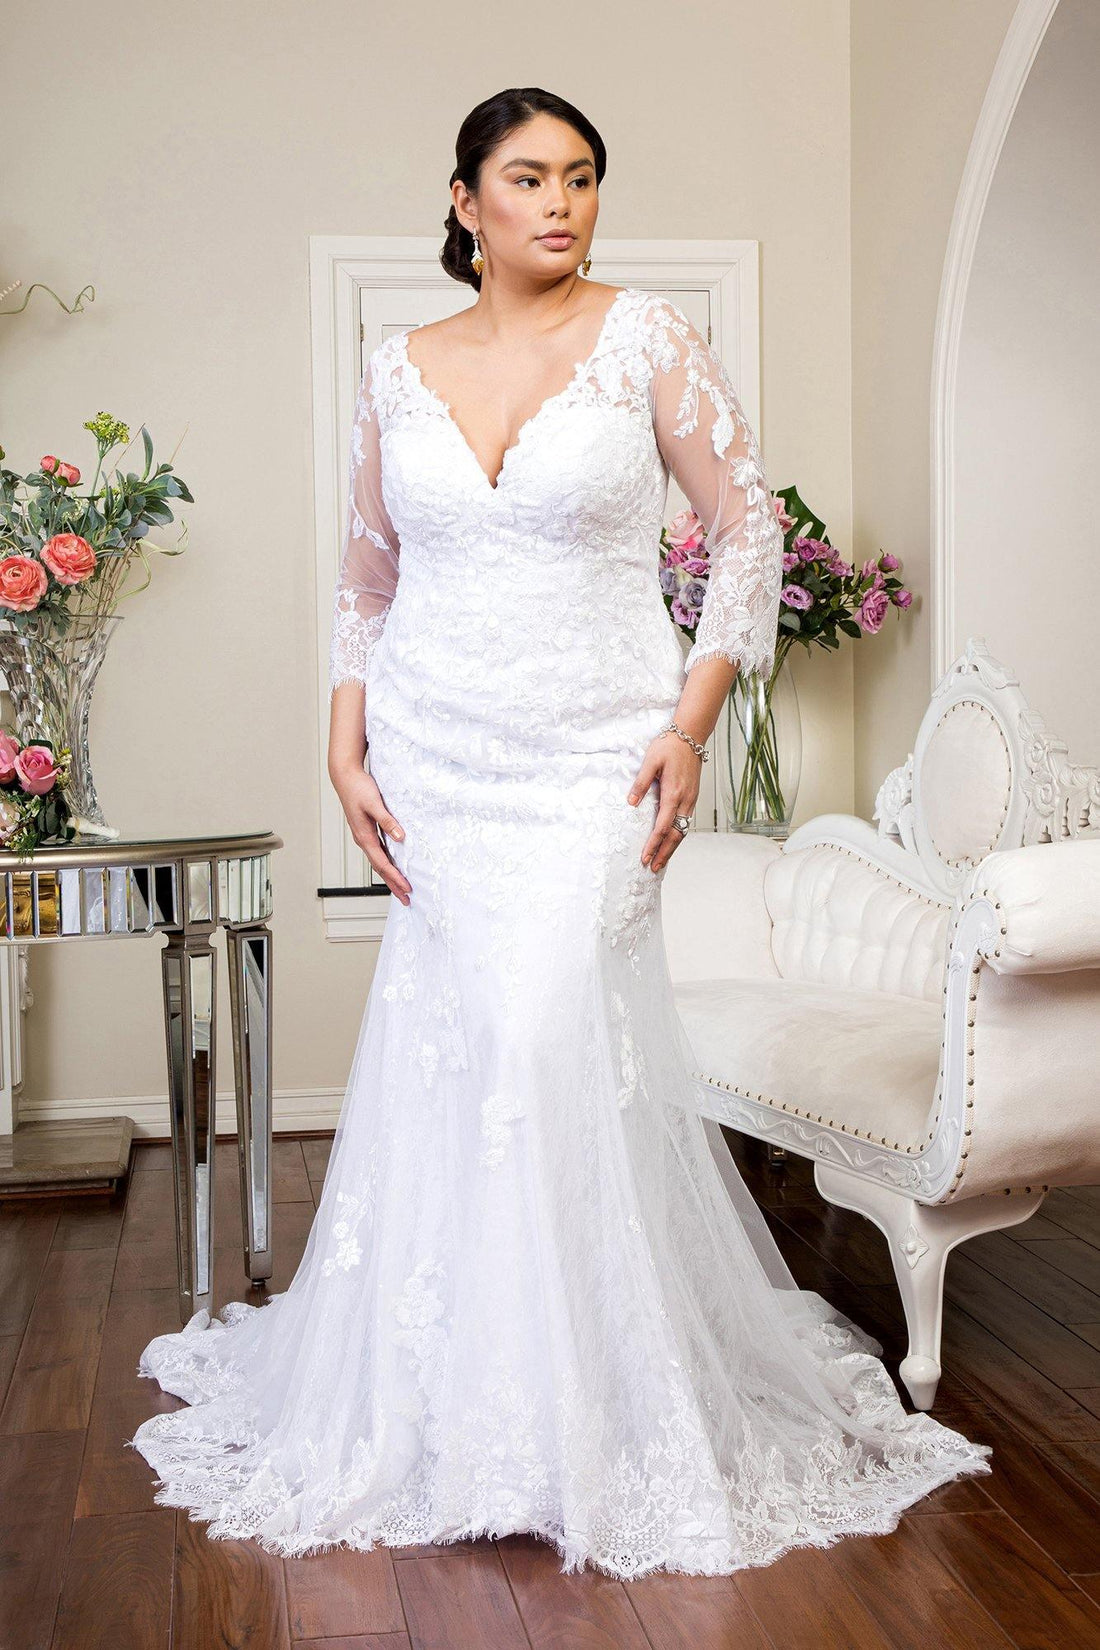 Best Picks for a Glamourous-Looking Winter Wedding Dress - The Dress Outlet